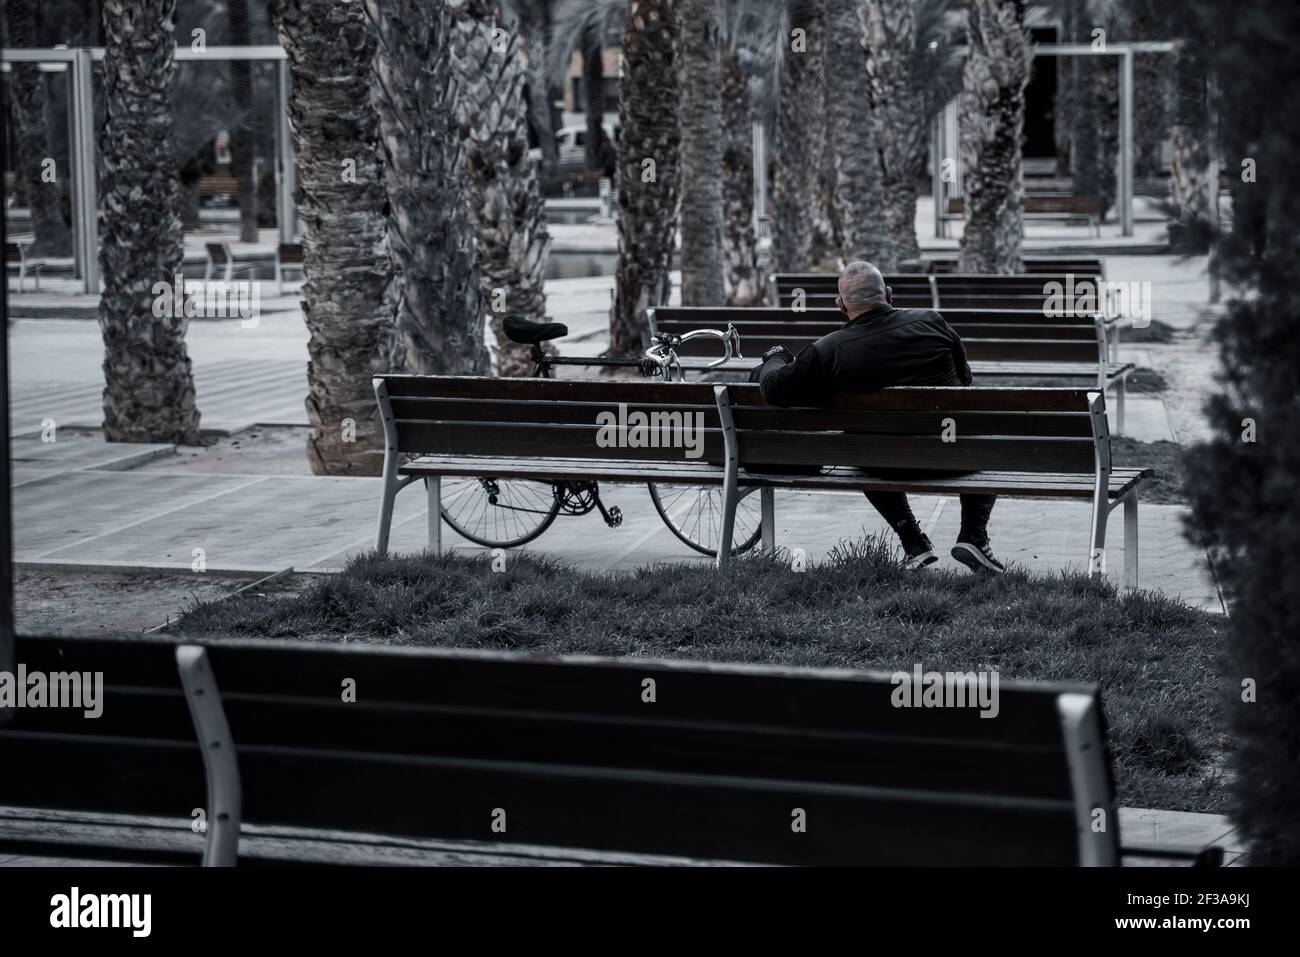 Person sitting on a bench Stock Photo